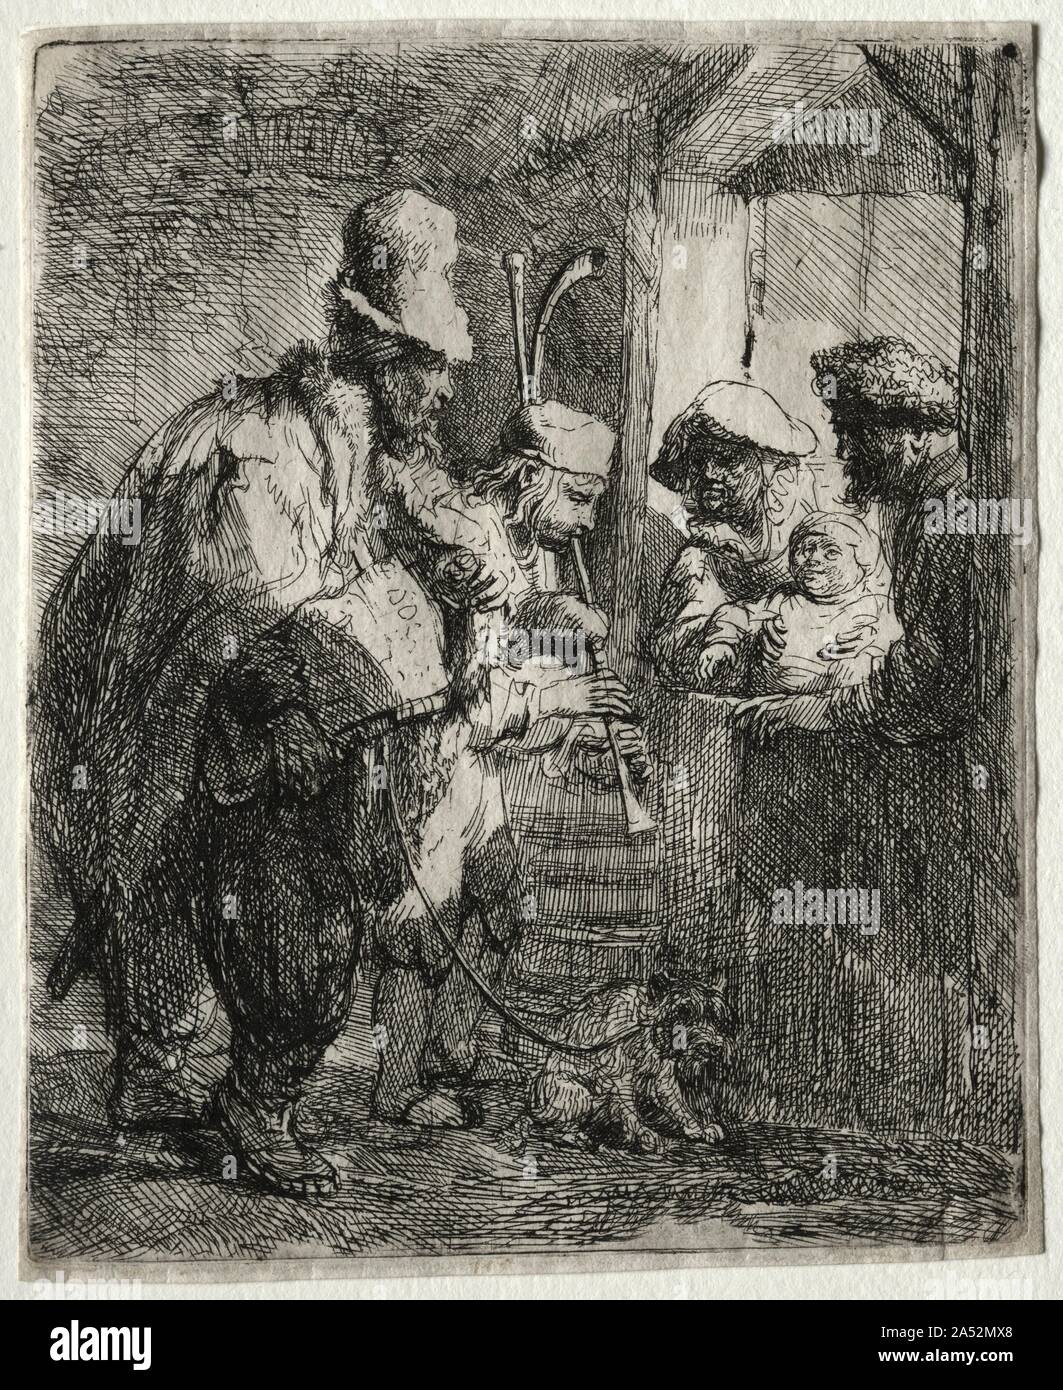 The Strolling Musicians, c. 1635. Although 17th-century Holland produced neither noteworthy composers nor renowned performers, rarely has another culture produced so many visual images of music as the Dutch. In this depiction of a pair of itinerant musicians wearily shuffling from door to door, Rembrandt reveals his compassionate understanding of human frailties. The hurdy-gurdy and bagpipes, as depicted here, were frequently associated with itinerant beggars and blind street singers in paintings and prints of the period. Stock Photo